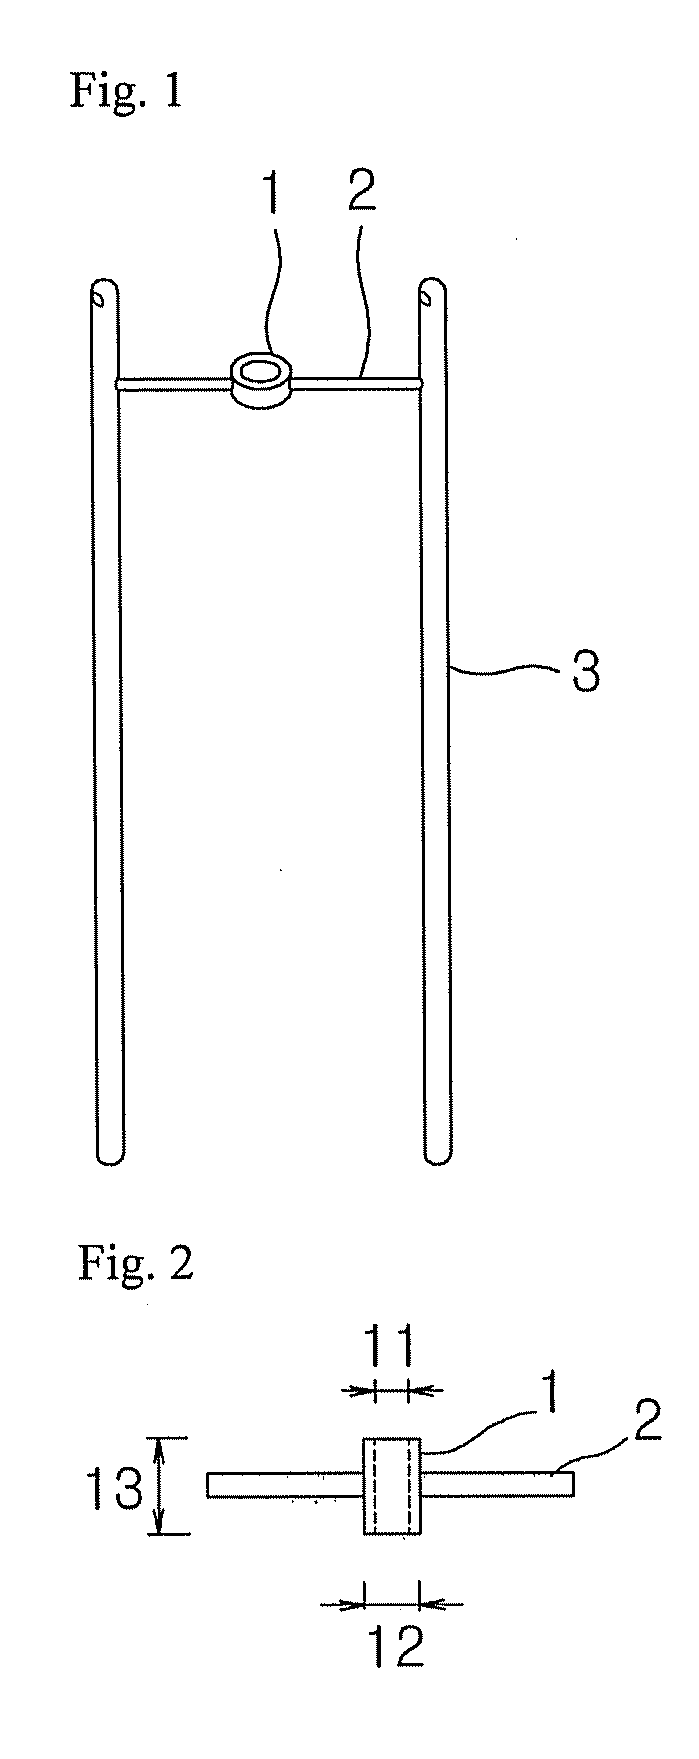 Device and method for measuring temperature in a tubular fixed-bed reactor